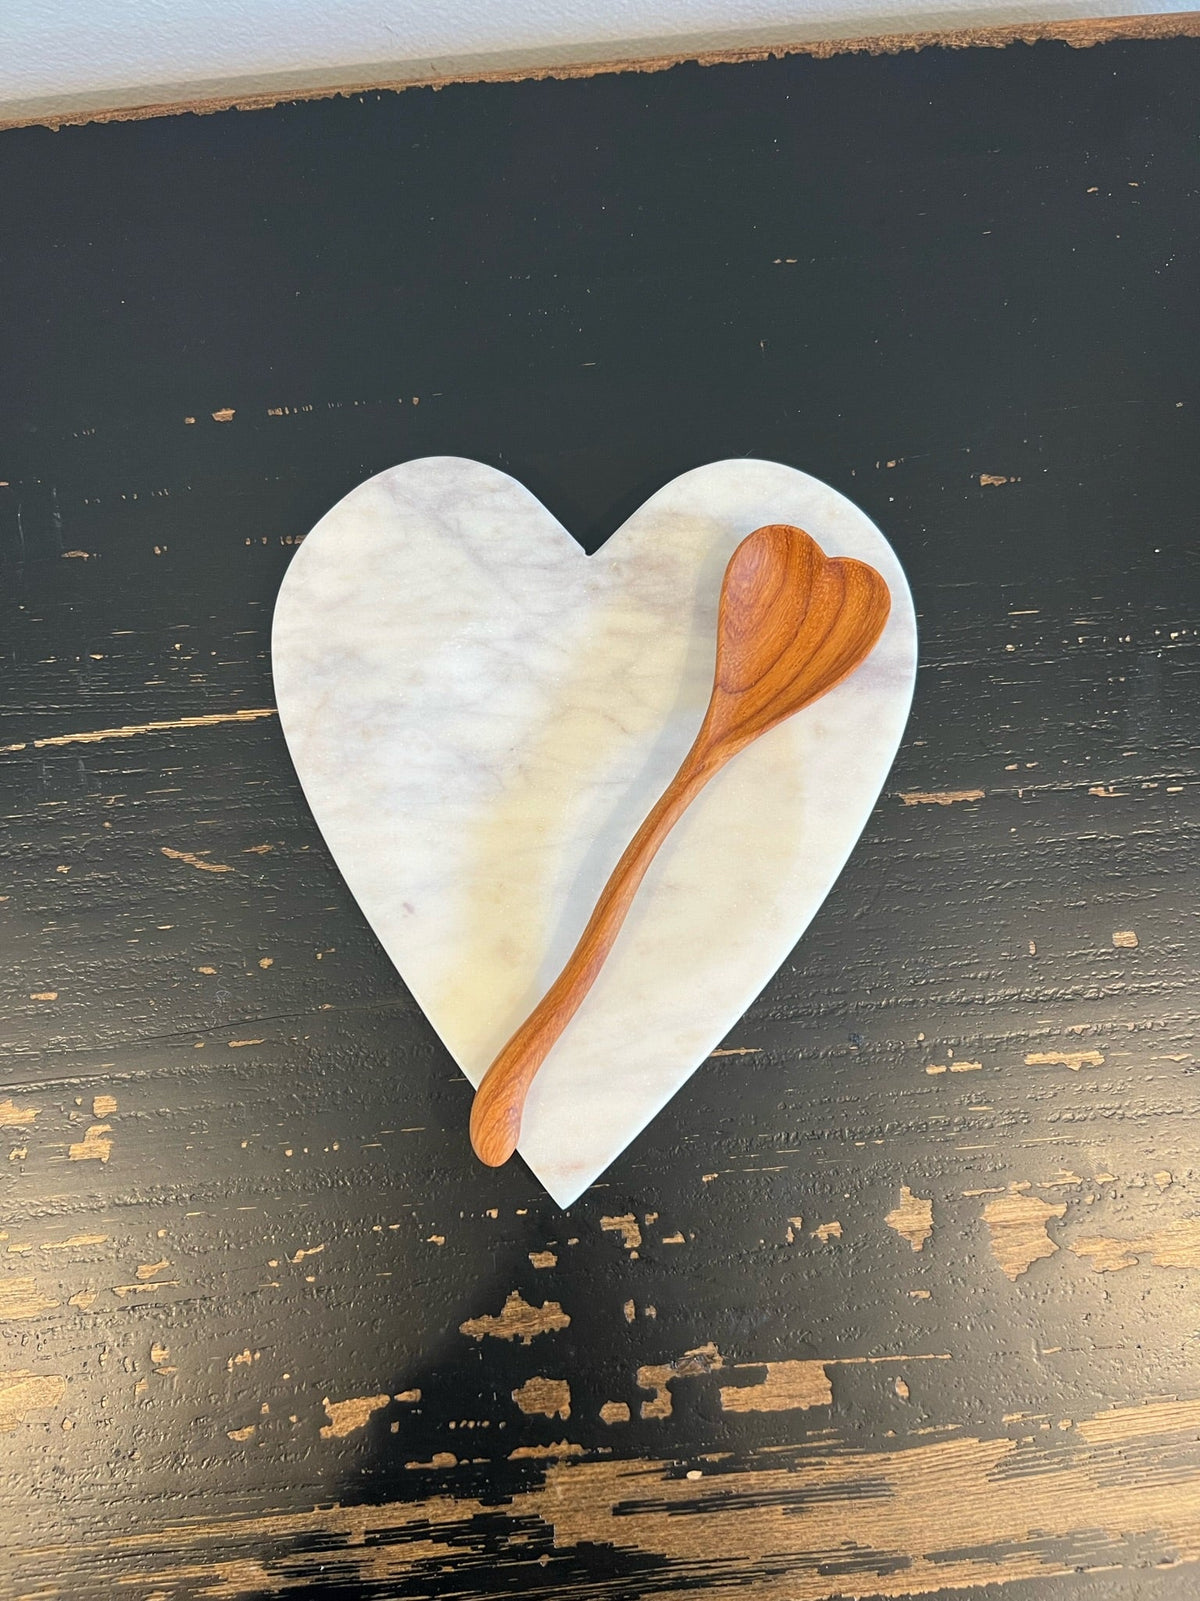 Home Decor -Marble Heart Spoon Rest